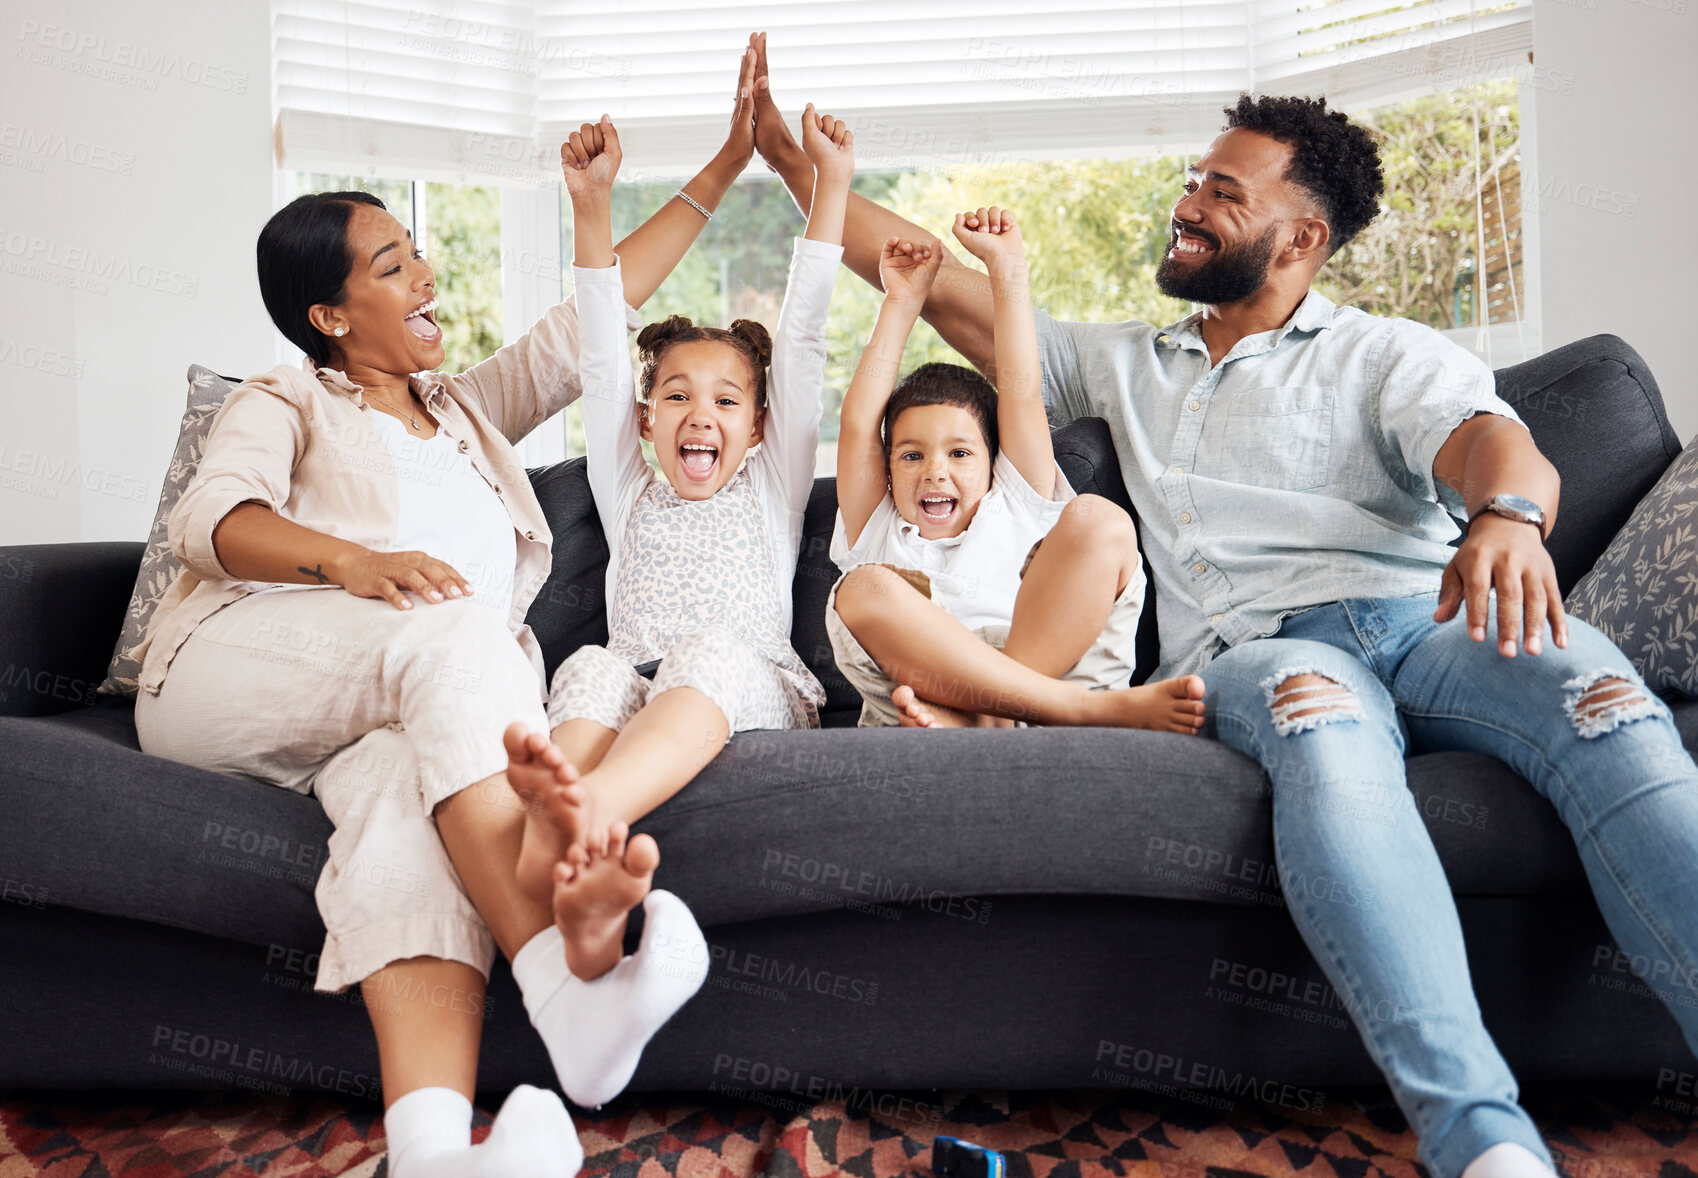 Buy stock photo Happy parents and excited children celebrate on the sofa while watching tv. Fun family time, relaxing at home and bonding. Mother and father high five, kids cheer for sports team win.